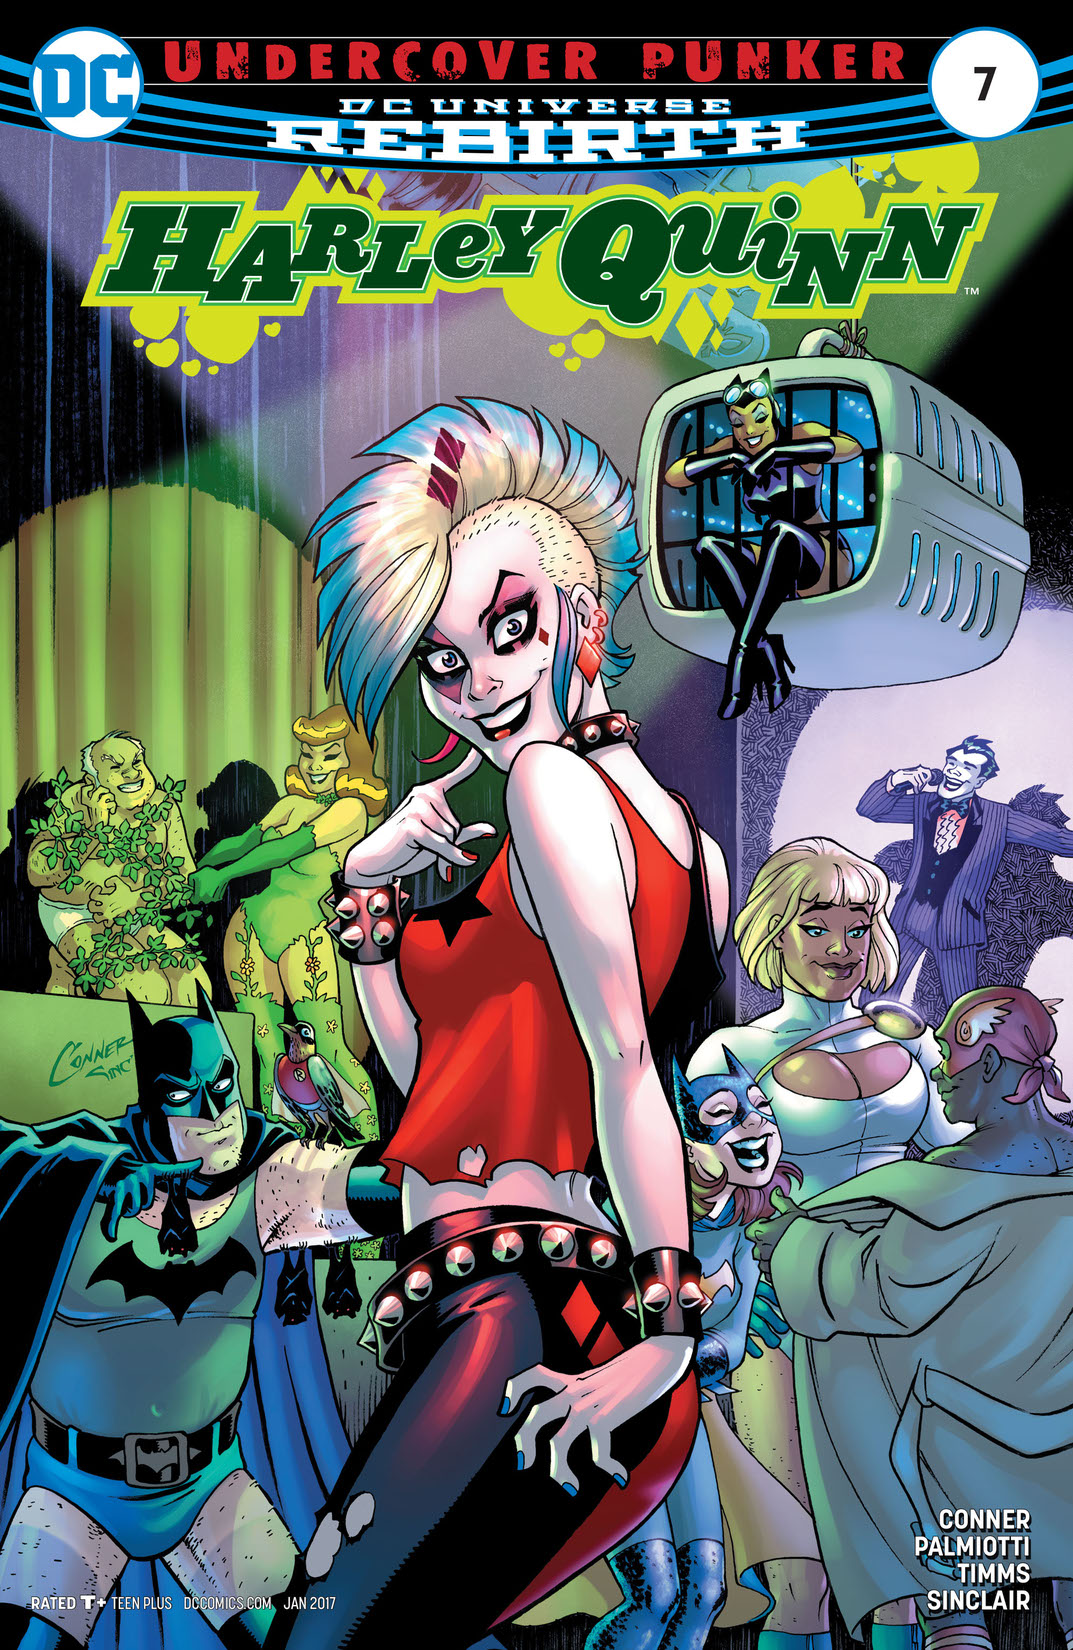 Harley Quinn (2016-) #7 preview images